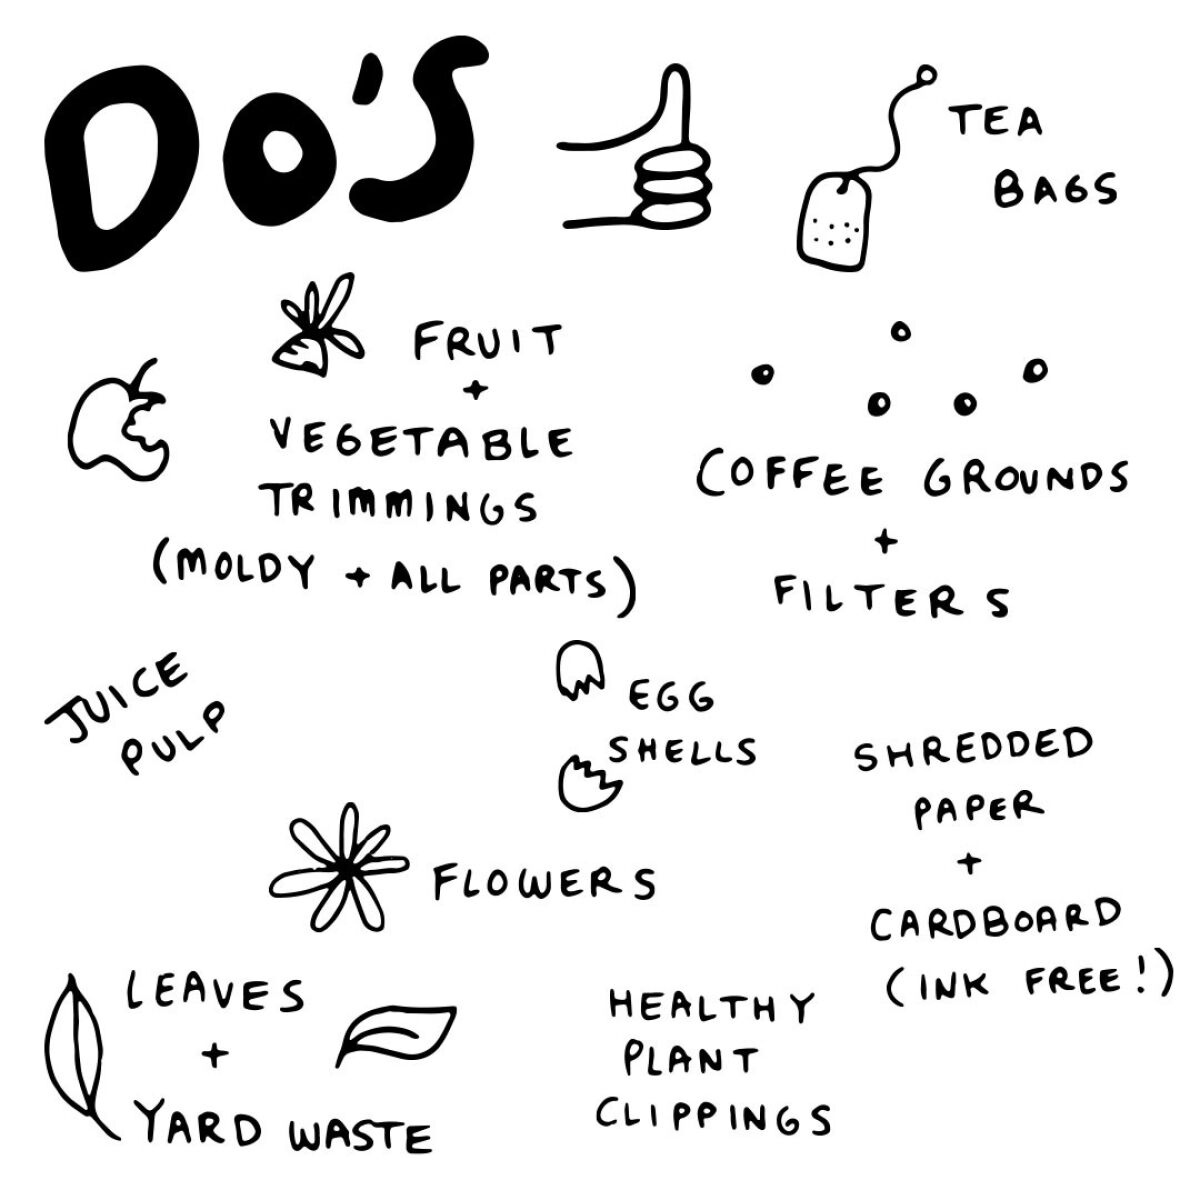 "Do's: tea bags, fruit and vegetable trimmings, coffee grounds and filters, egg shells, juice pulp, leaves and yard waste."